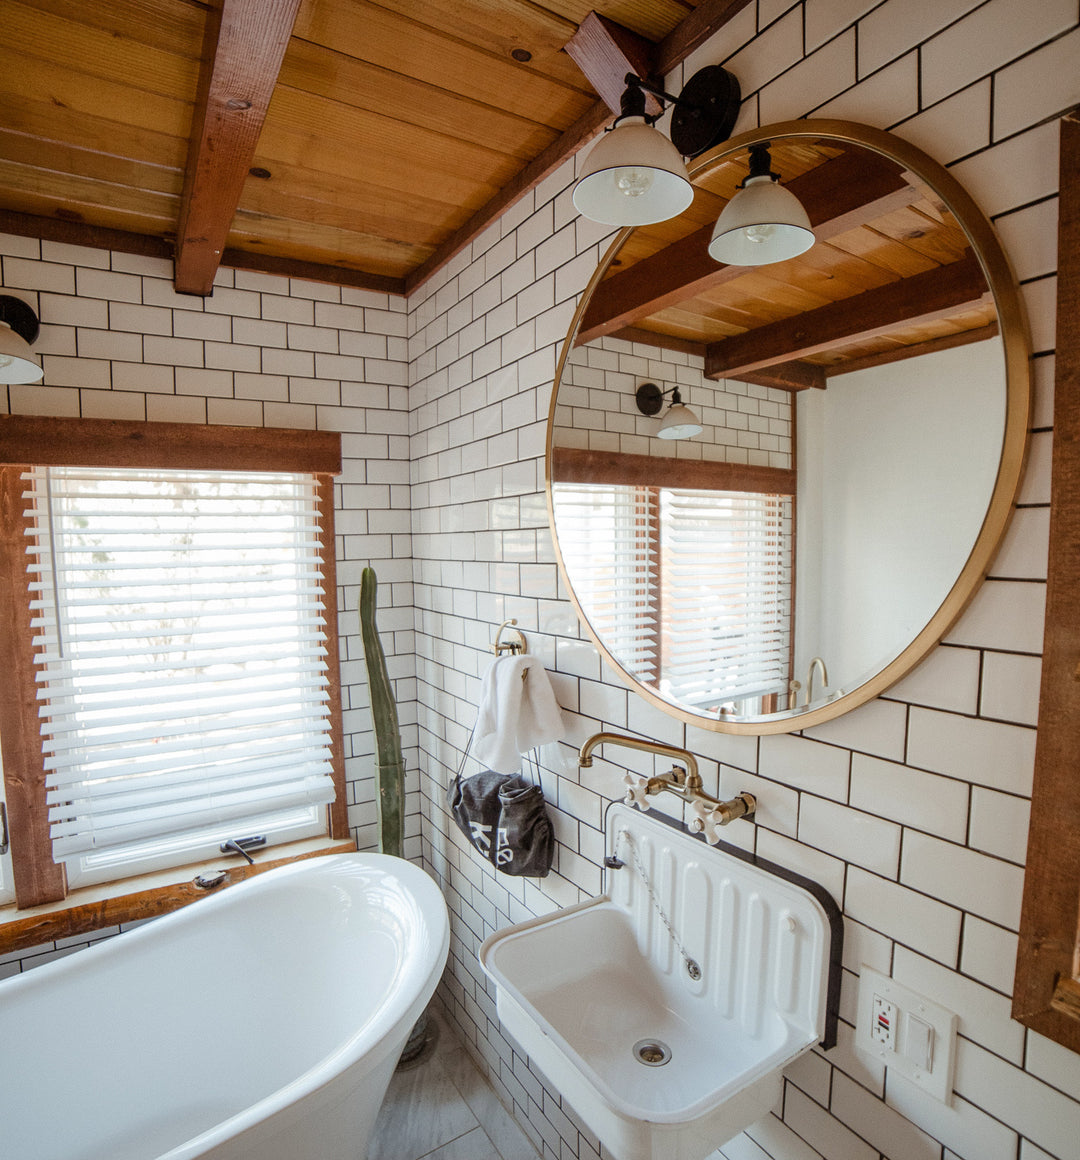 5 Things You Shouldn’t Keep In The Bathroom (& 2 Things You Should)